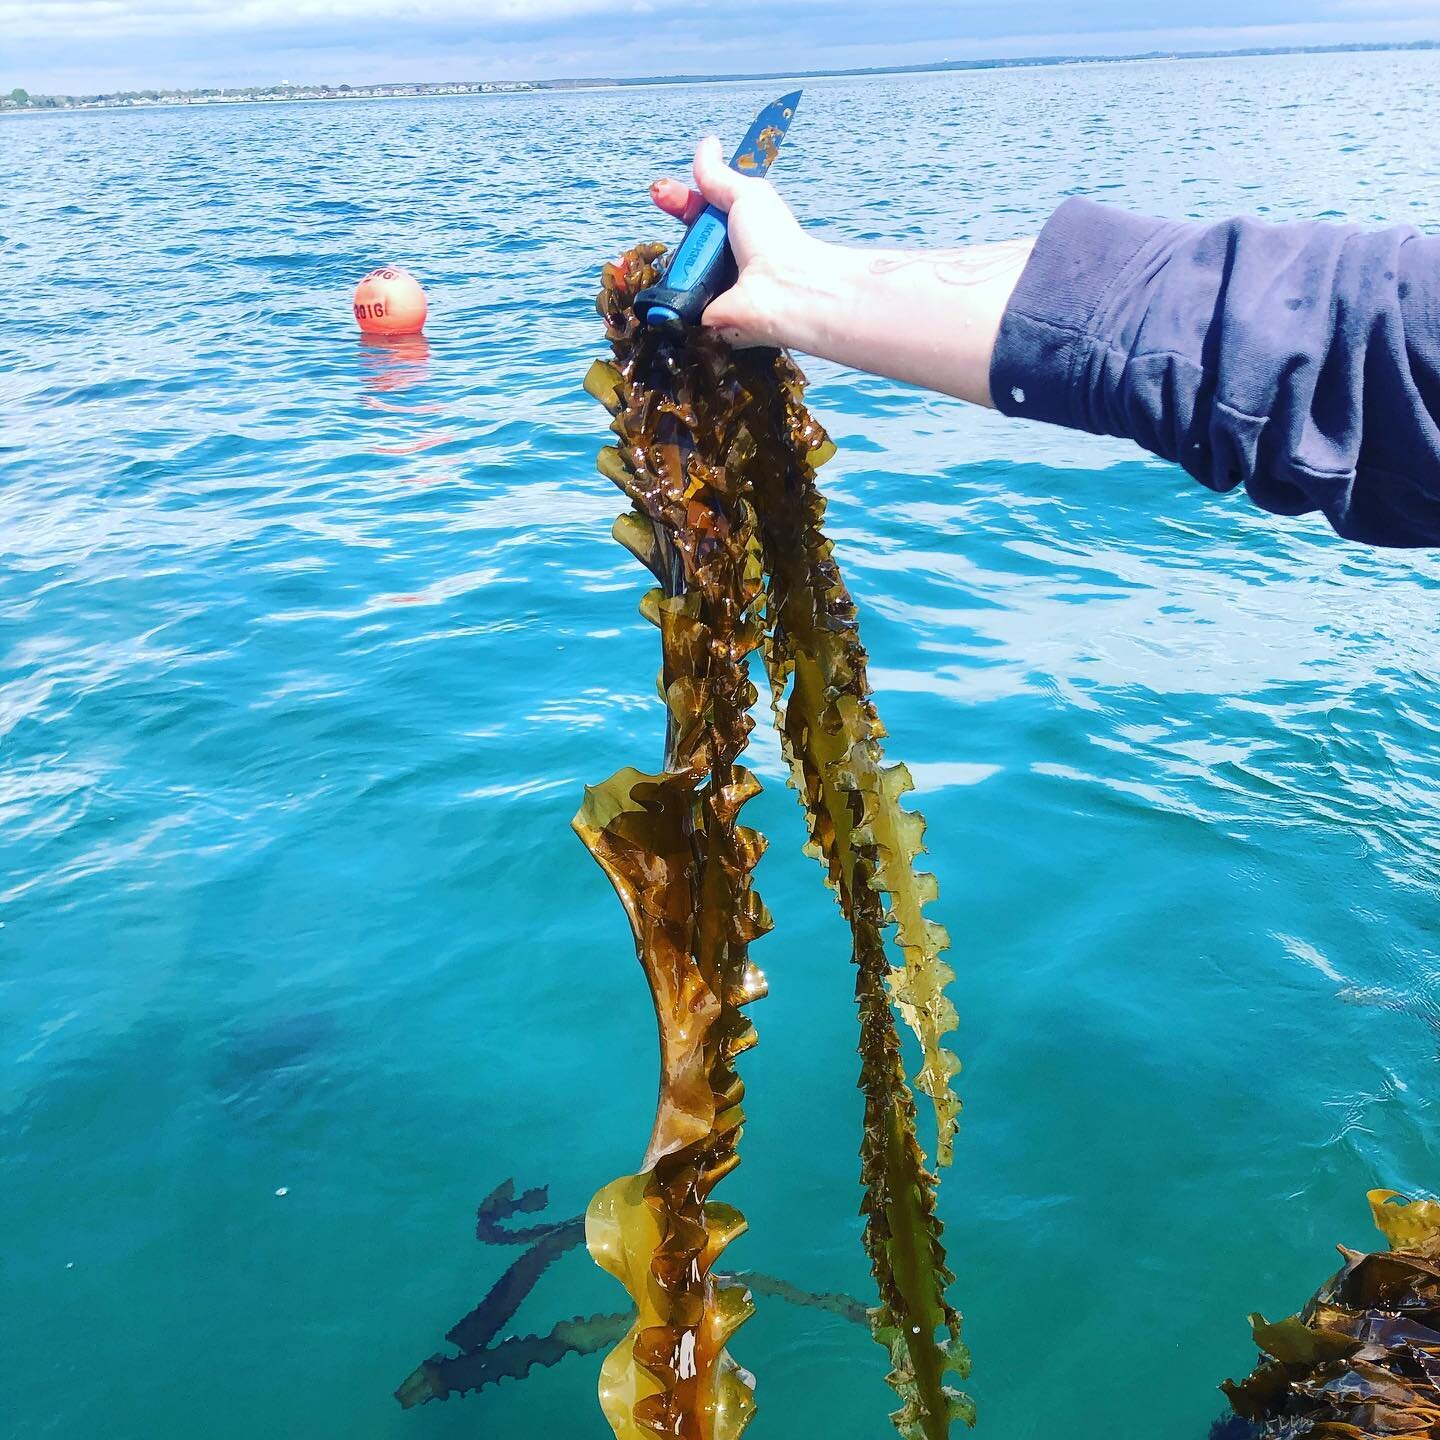 Seaweed farmers used to refer to their crops as gambler&rsquo;s grass because the crops were wildly unpredictable  #sugarkelp #oceanfarm #seaweed #themoreyouknow🌈 #oceanfood #restorative #regenerativefarming #aquaculture